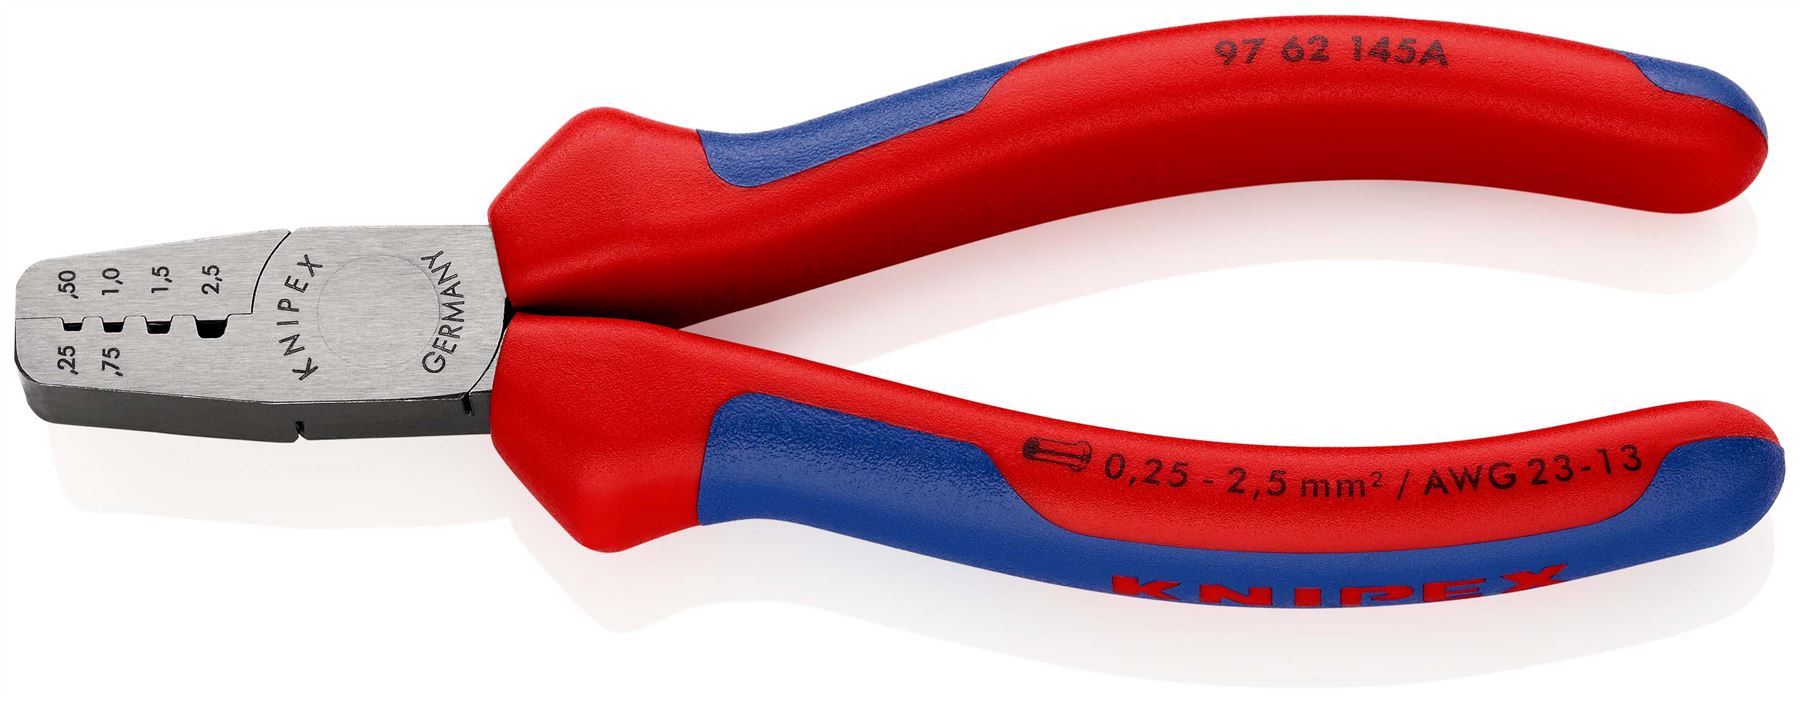 KNIPEX Crimping Pliers for Wire Ferrules 145mm 0.25-2.5mm² 145mm Multi Component Grips 97 62 145 A